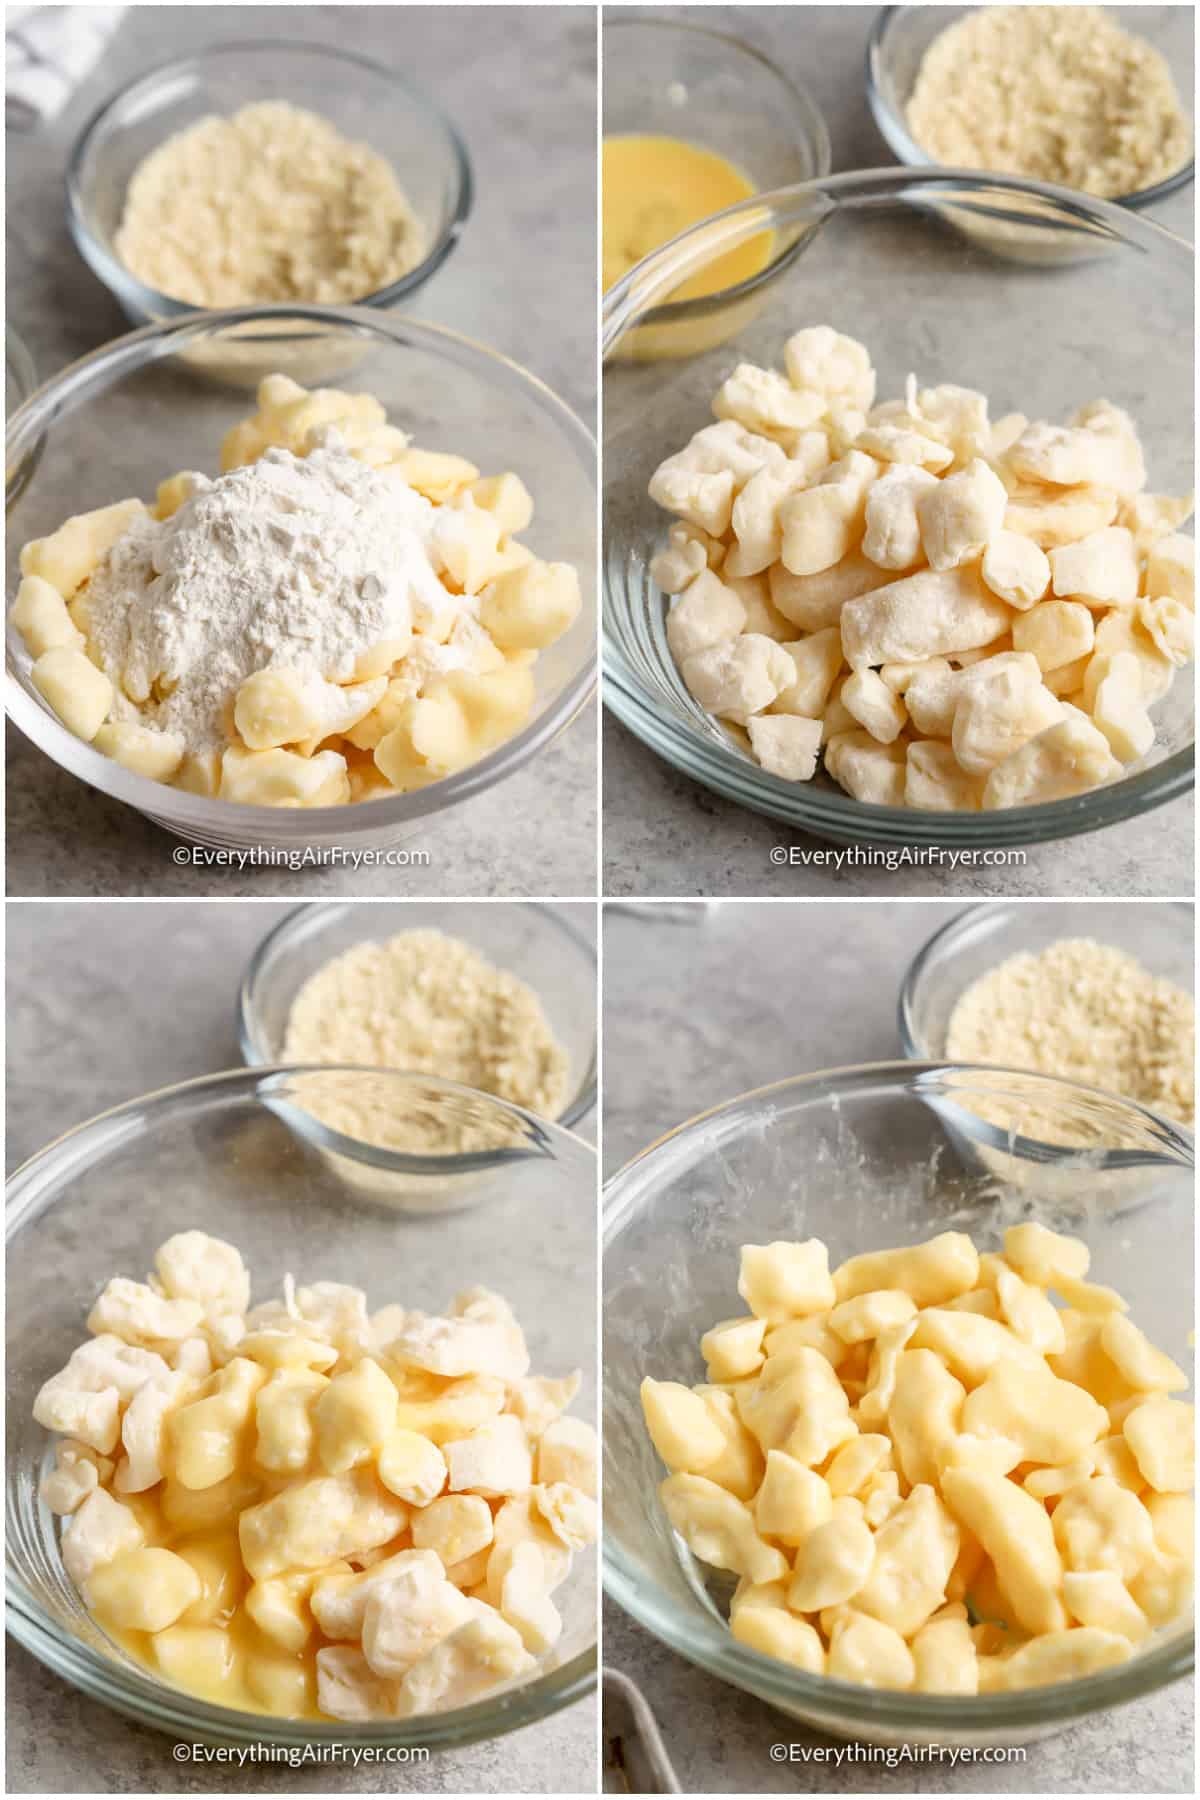 Steps to prepare Air Fryer Cheese Curds